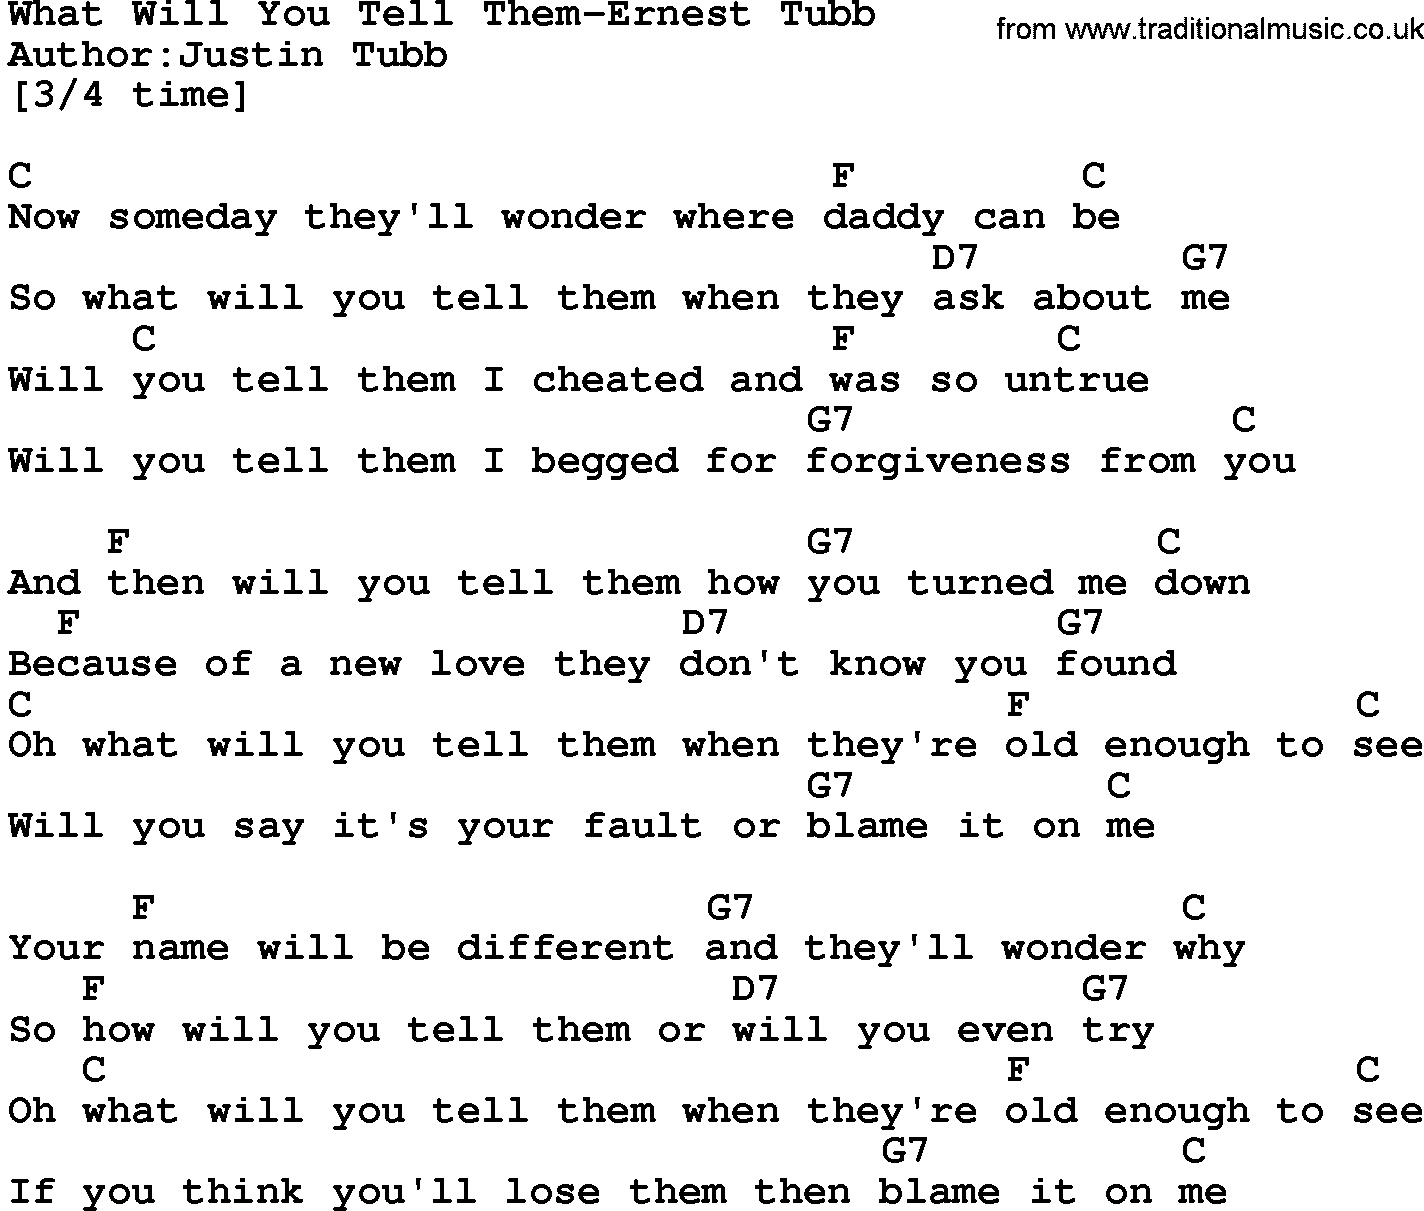 Country music song: What Will You Tell Them-Ernest Tubb lyrics and chords